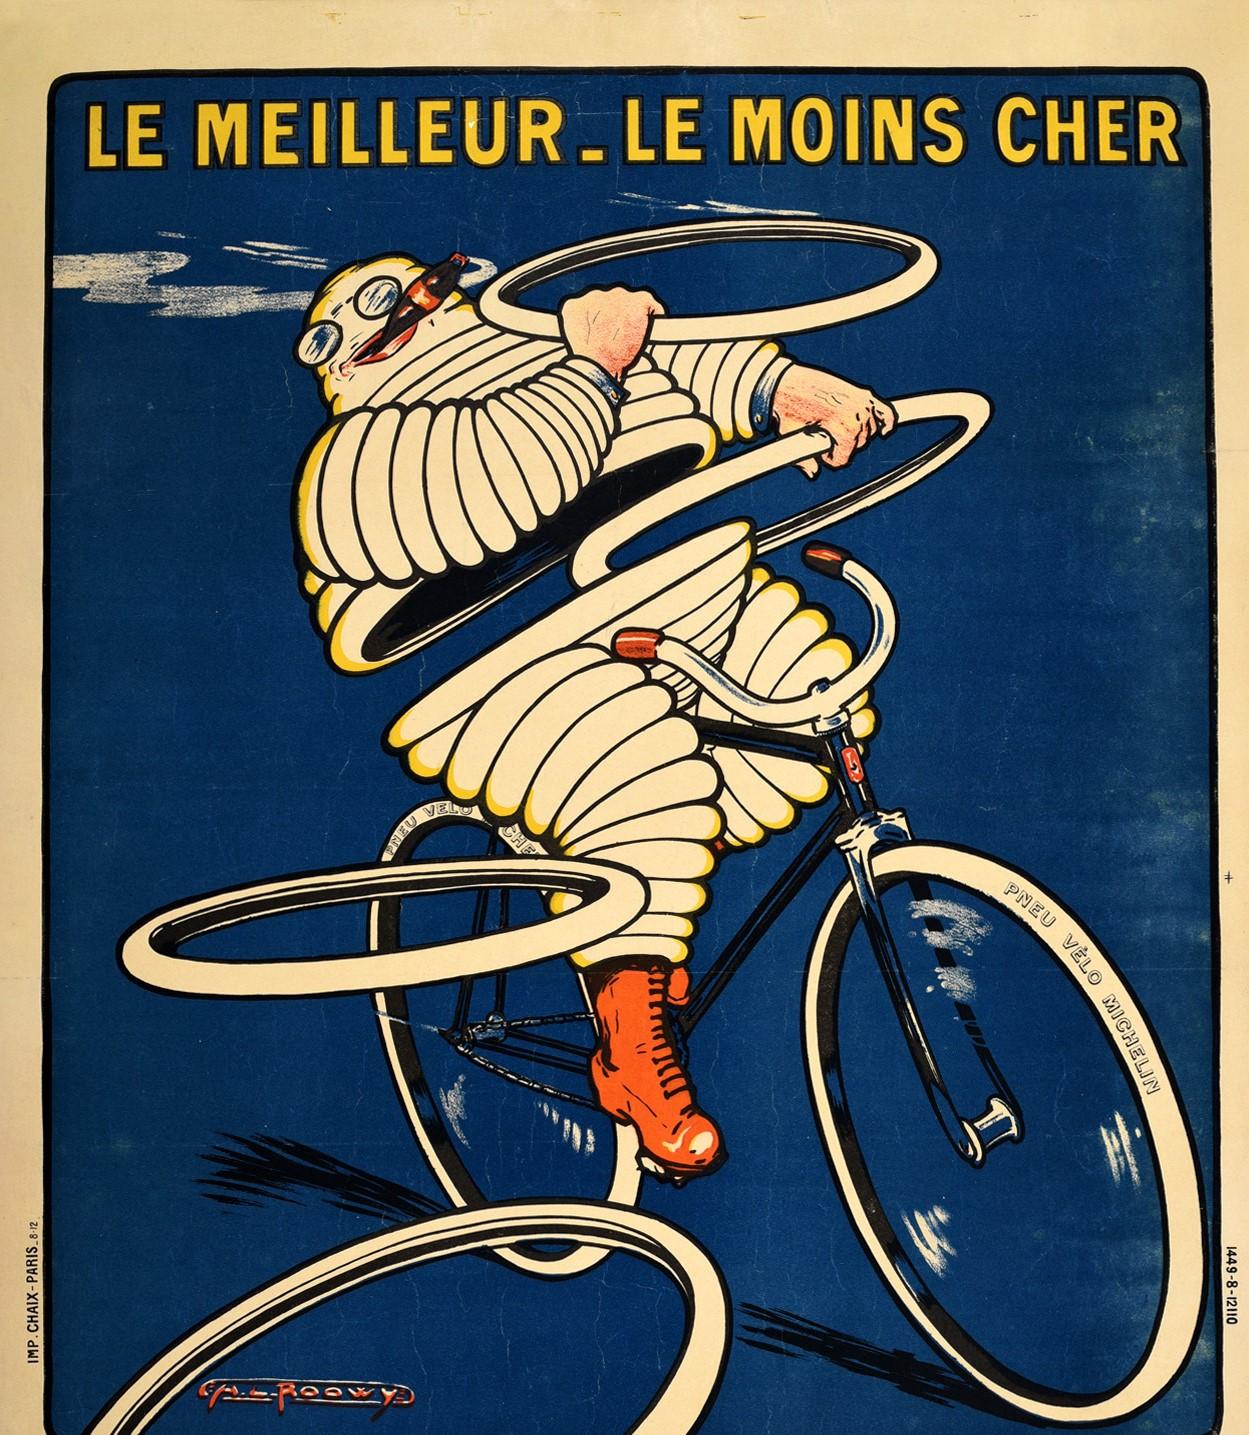 Original antique advertising poster for Pneu Vélo Michelin bike tires featuring an iconic illustration of the Bibendum / Michelin Man character made out of white tyres, riding a bike at speed and smoking a cigar as he frisbees tyres towards the